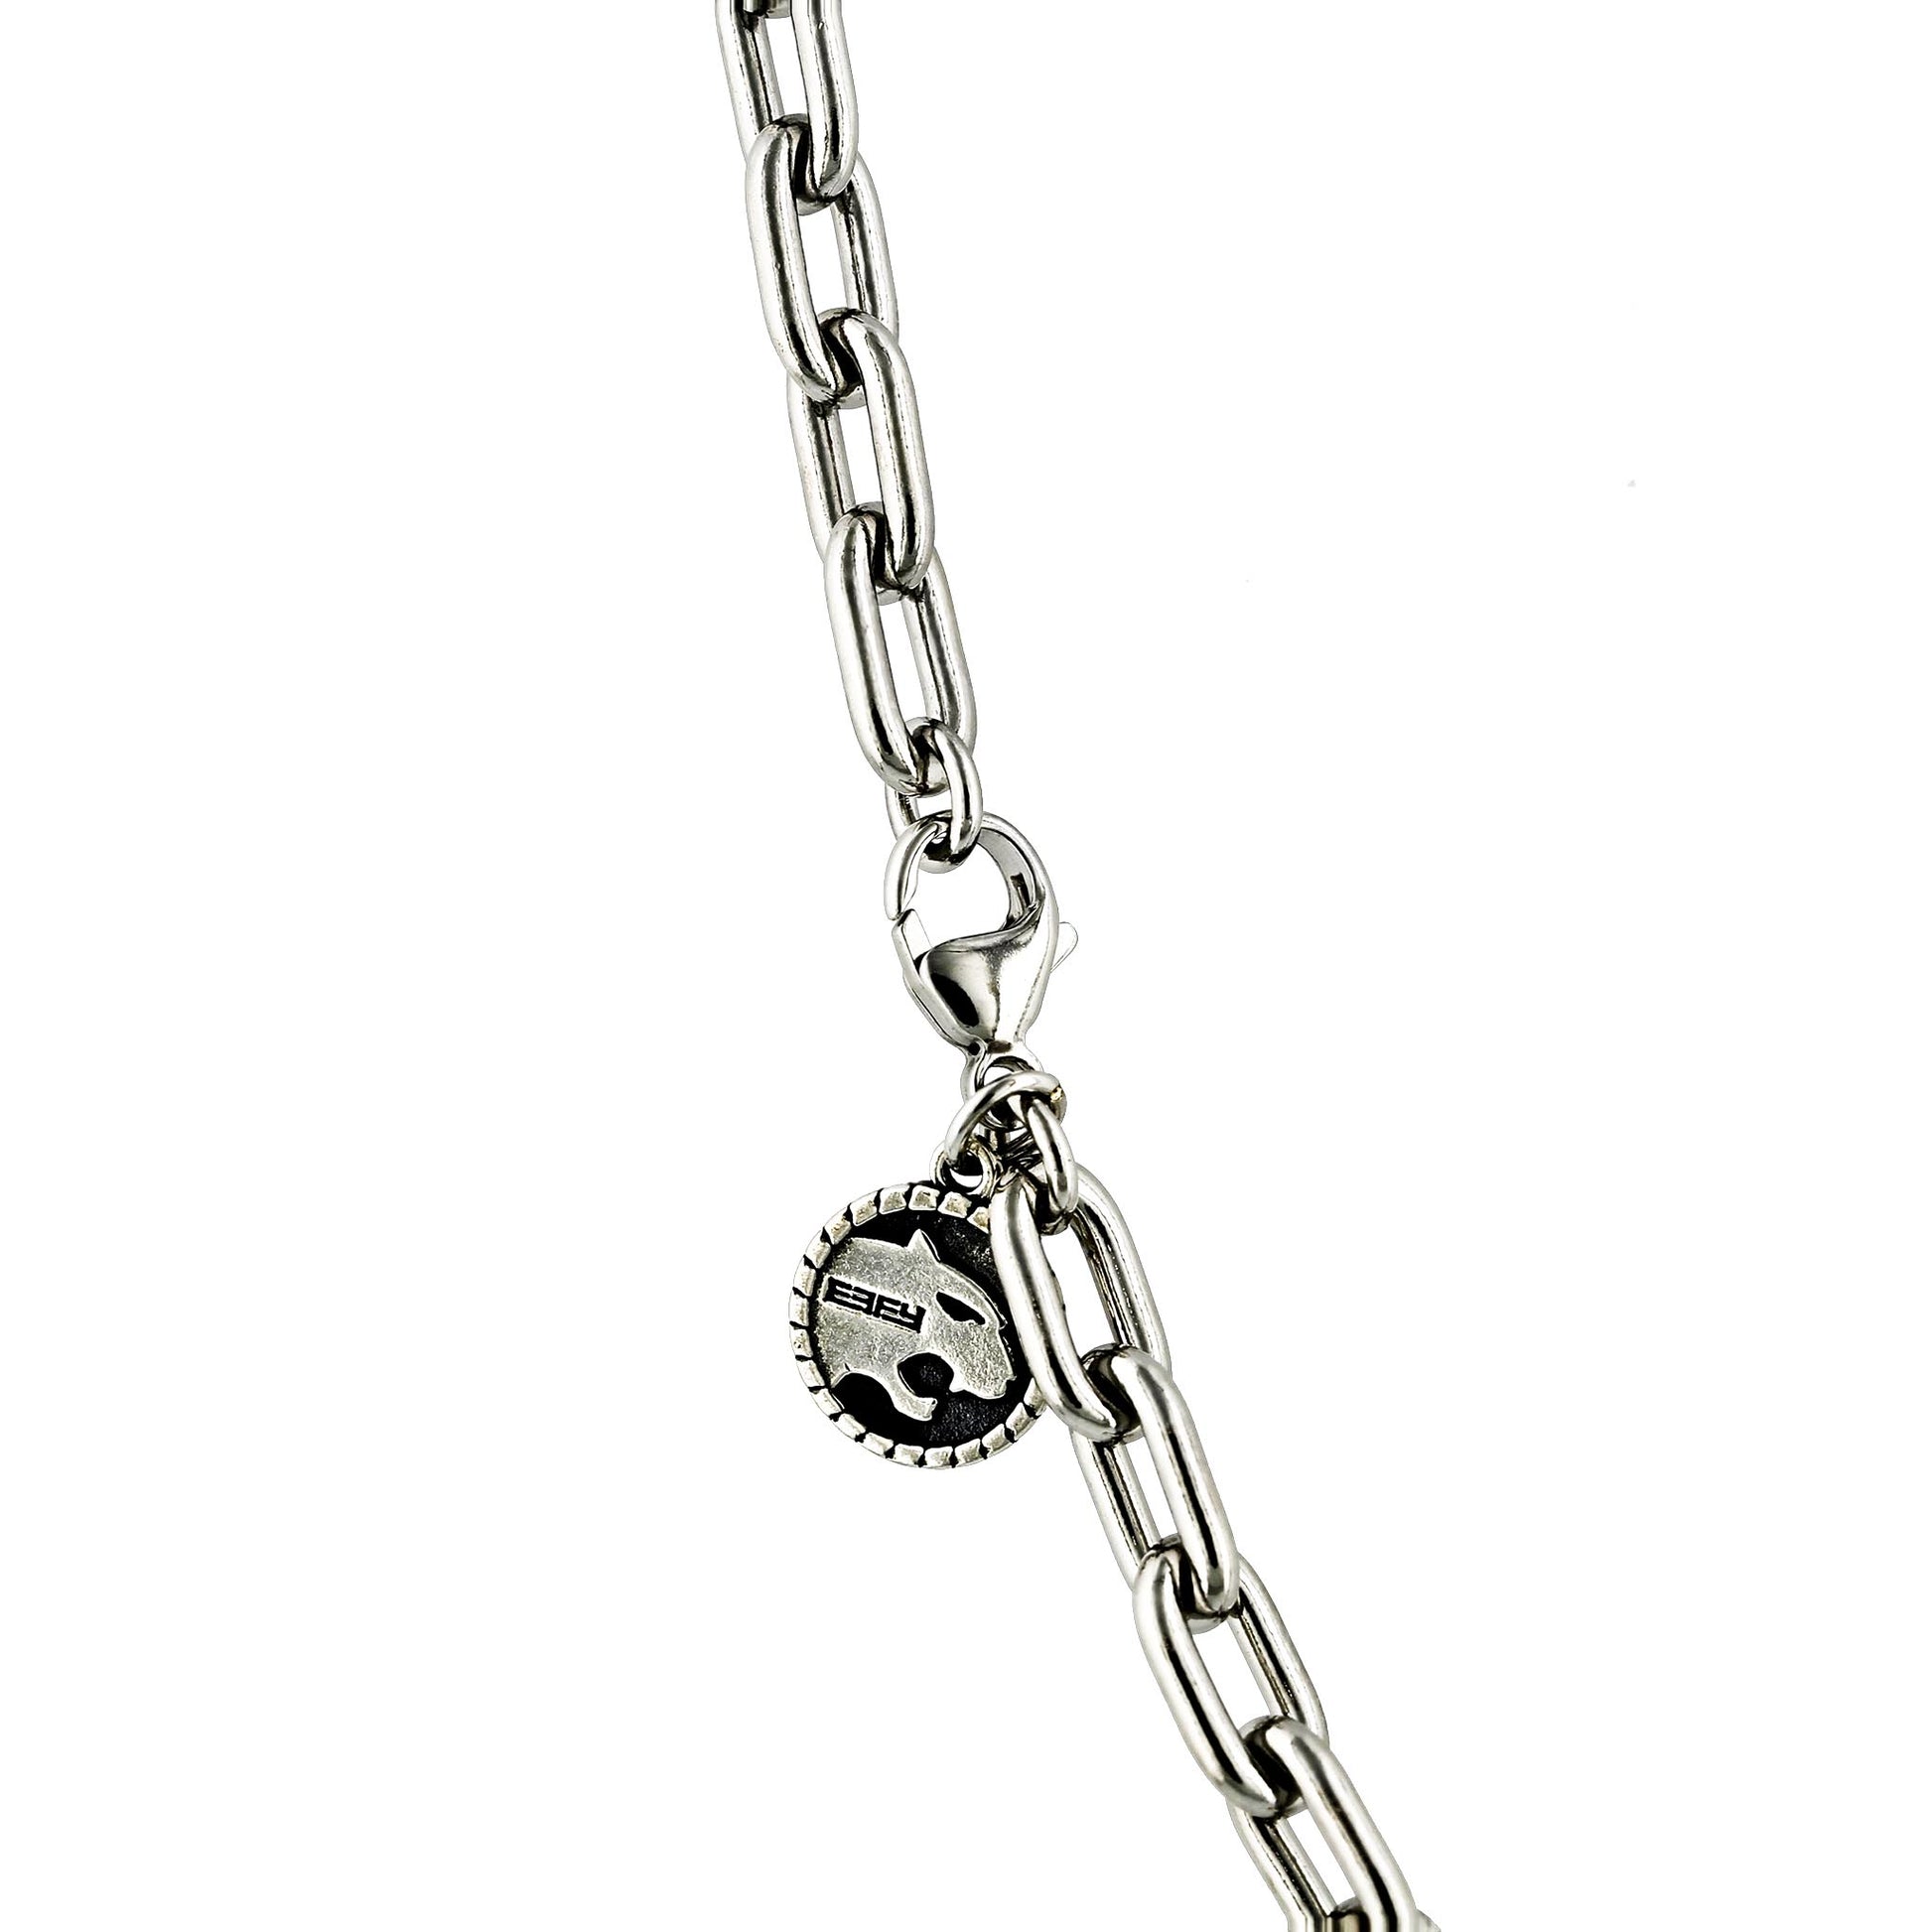 772905 - Sterling Silver - Effy Cable Chain Necklace